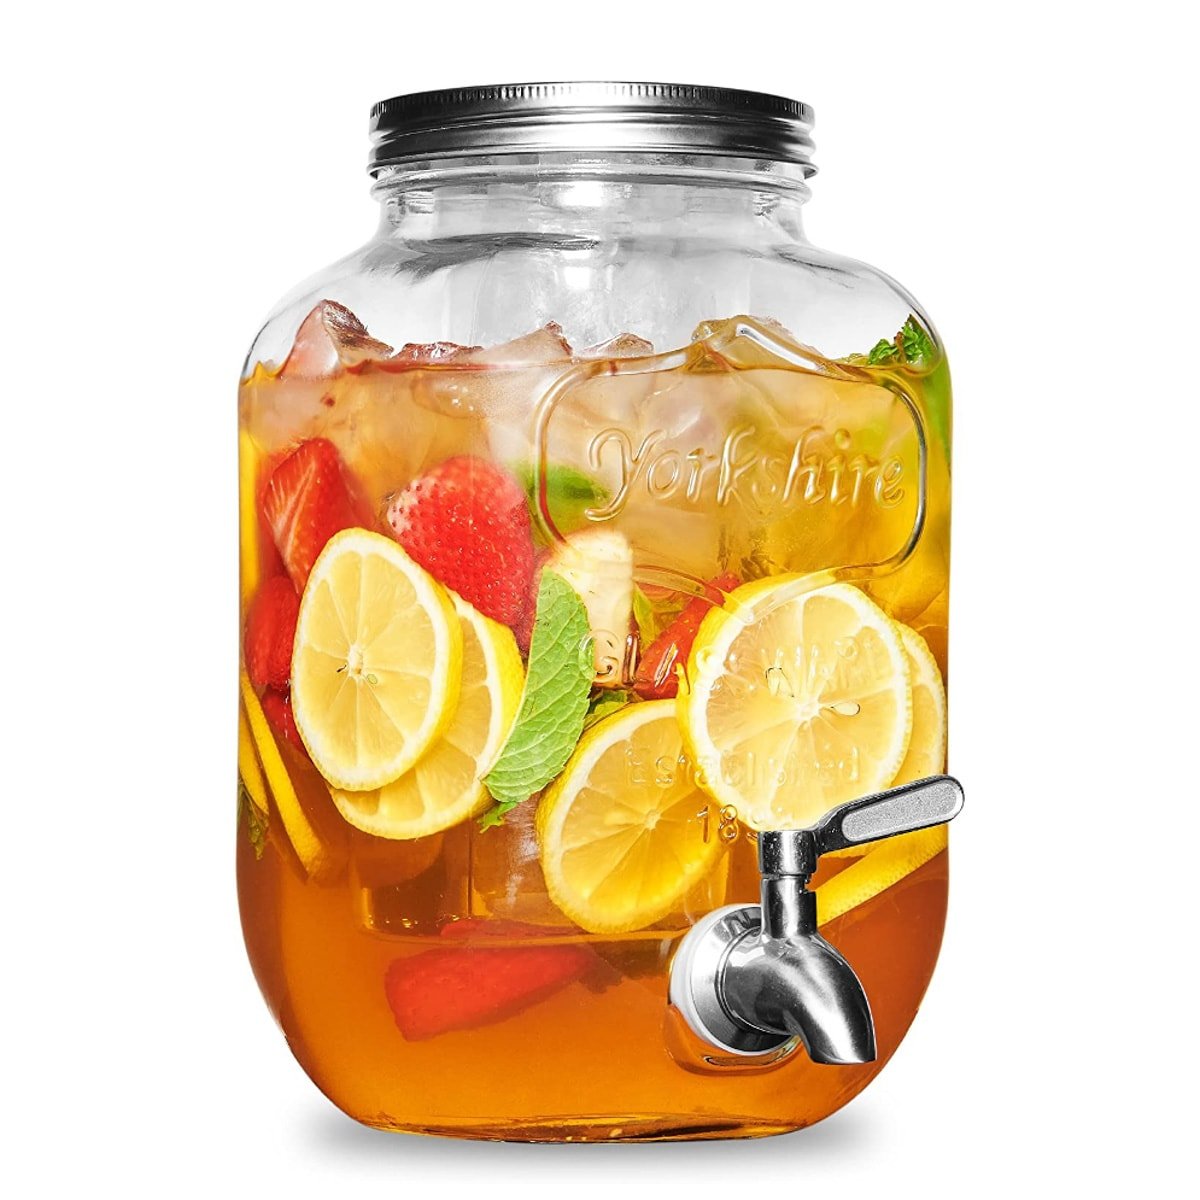 A glass drink dispenser with a stainless steel lid and dispenser filled with ice tea and sliced fruit.